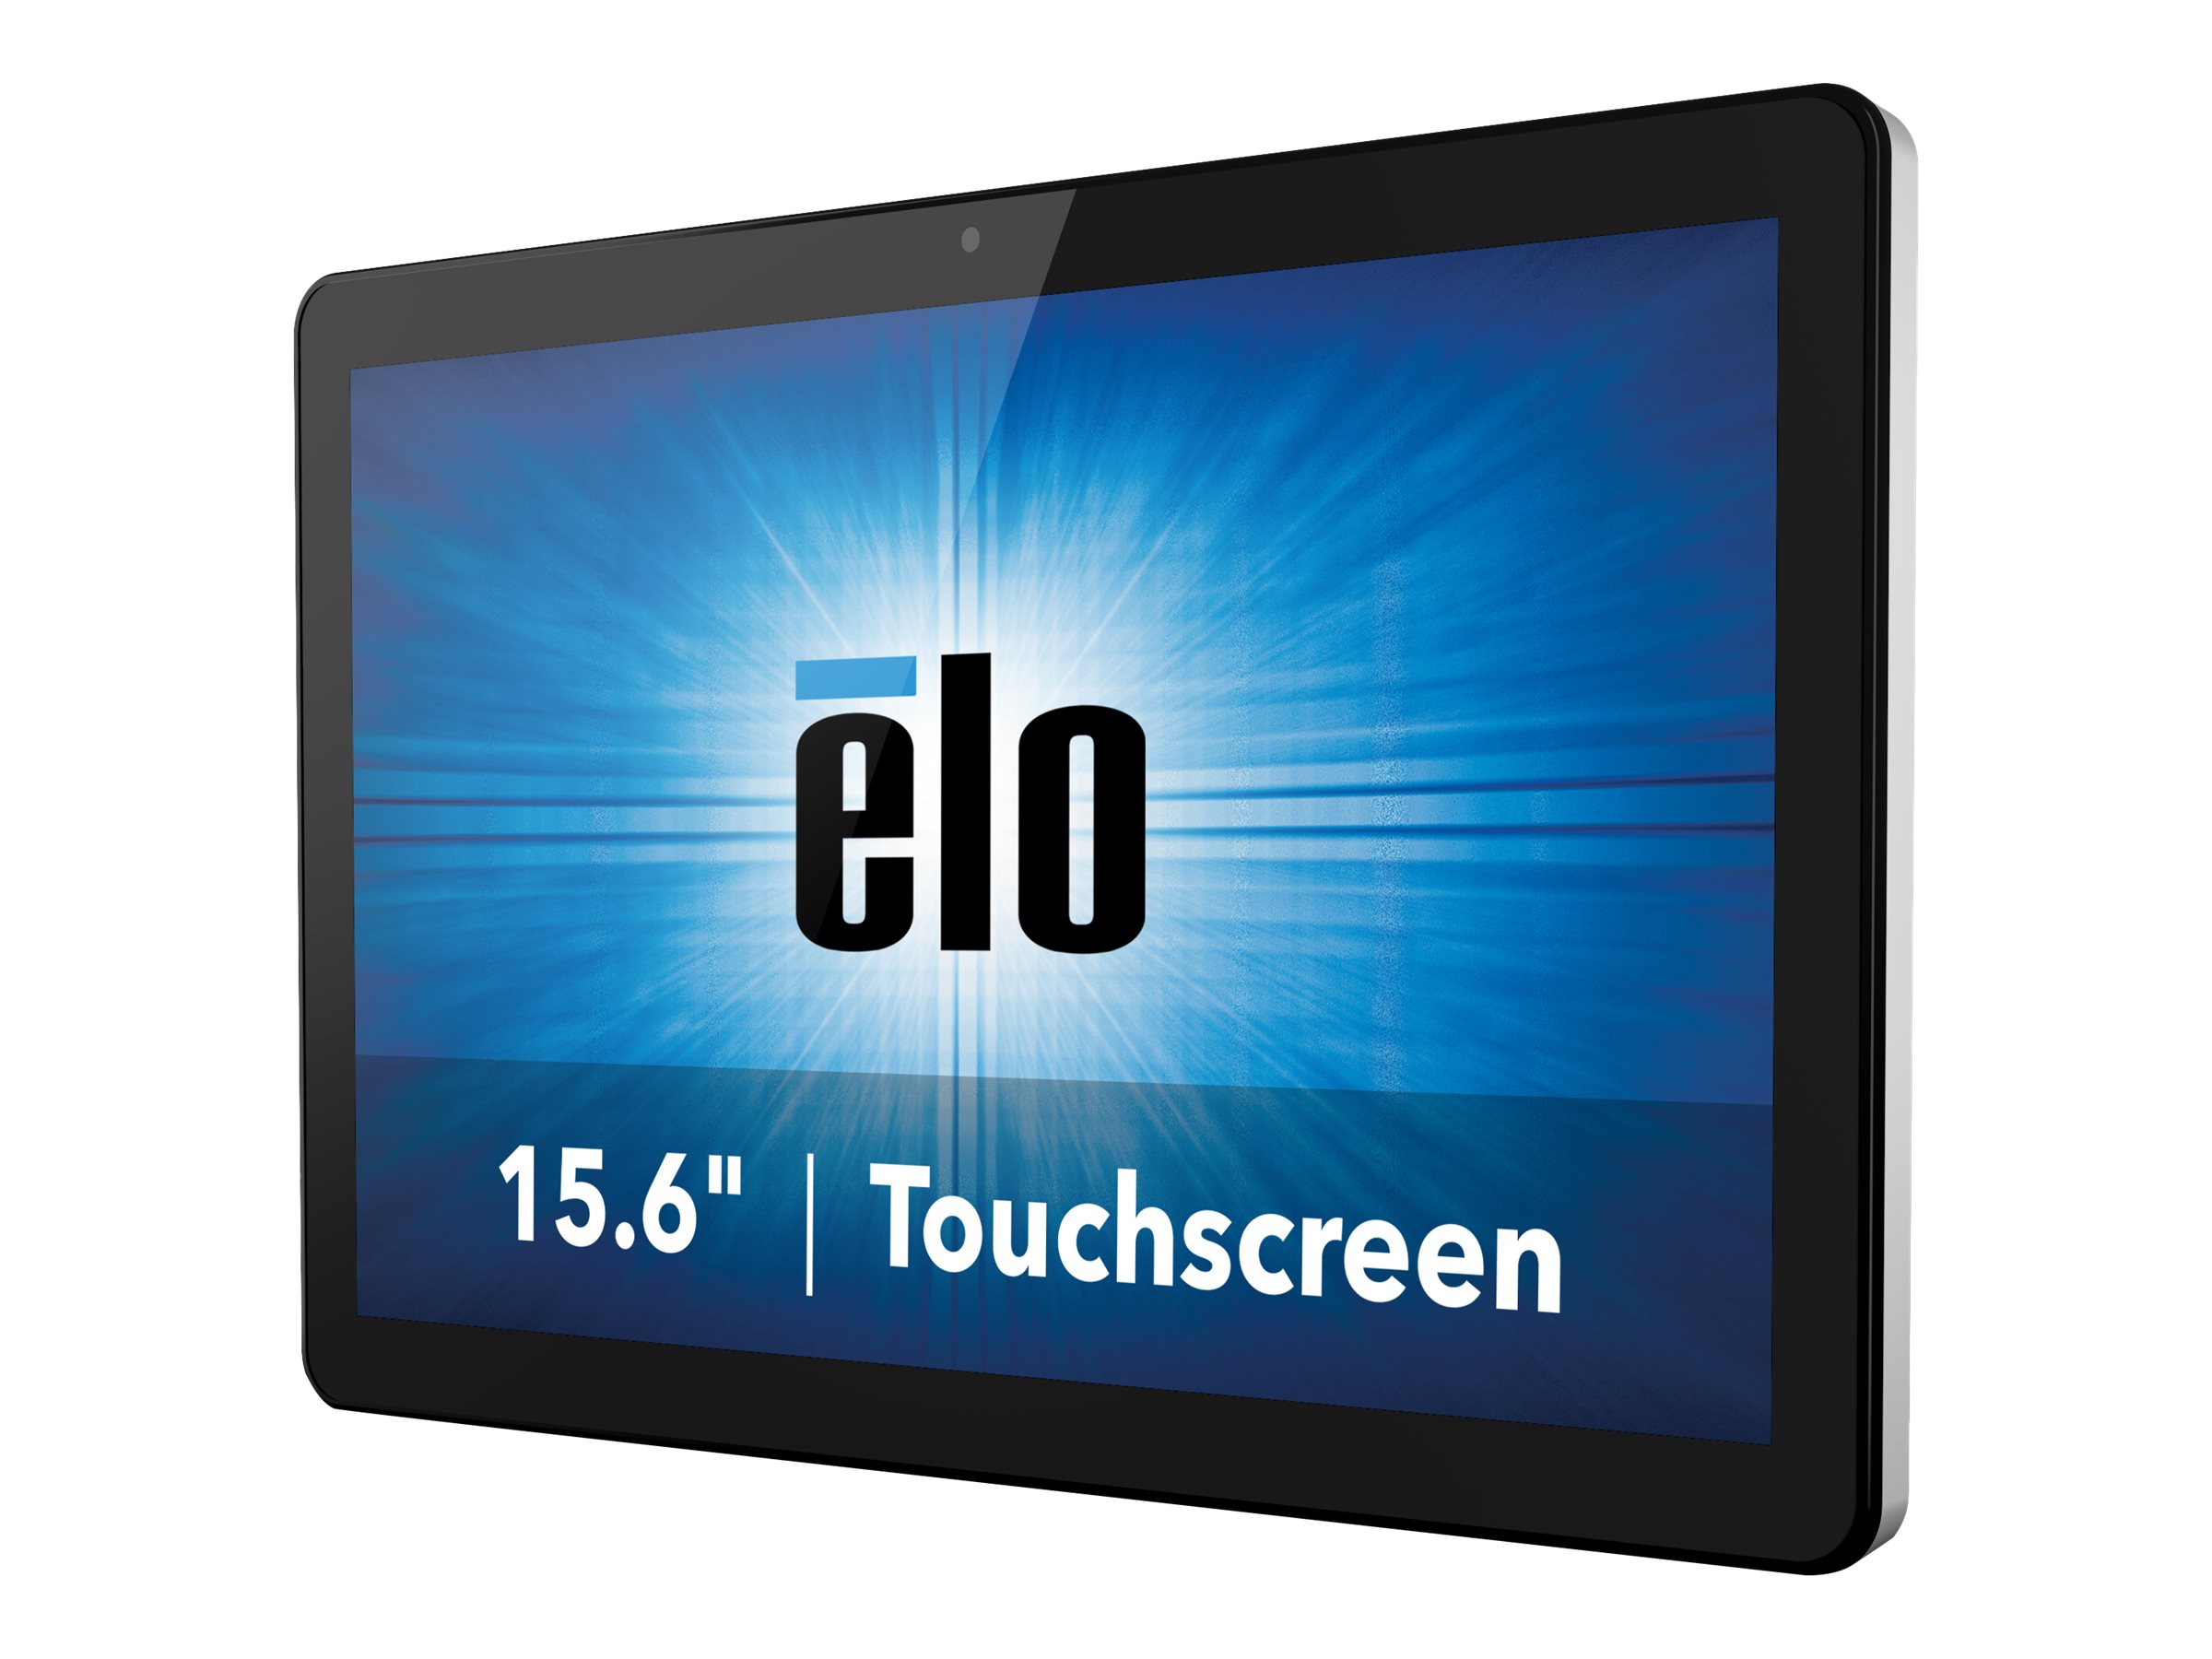 Elo Touch Solutions Elo I-Series 3.0 - All-in-One (Komplettlösung) - 1 x Snapdragon APQ8053 / 1.8 GHz - RAM 3 GB - SSD 32 GB - GigE - WLAN: 802.11a/b/g/n/ac, Bluetooth 4.1 - Android 8.1 (Oreo)